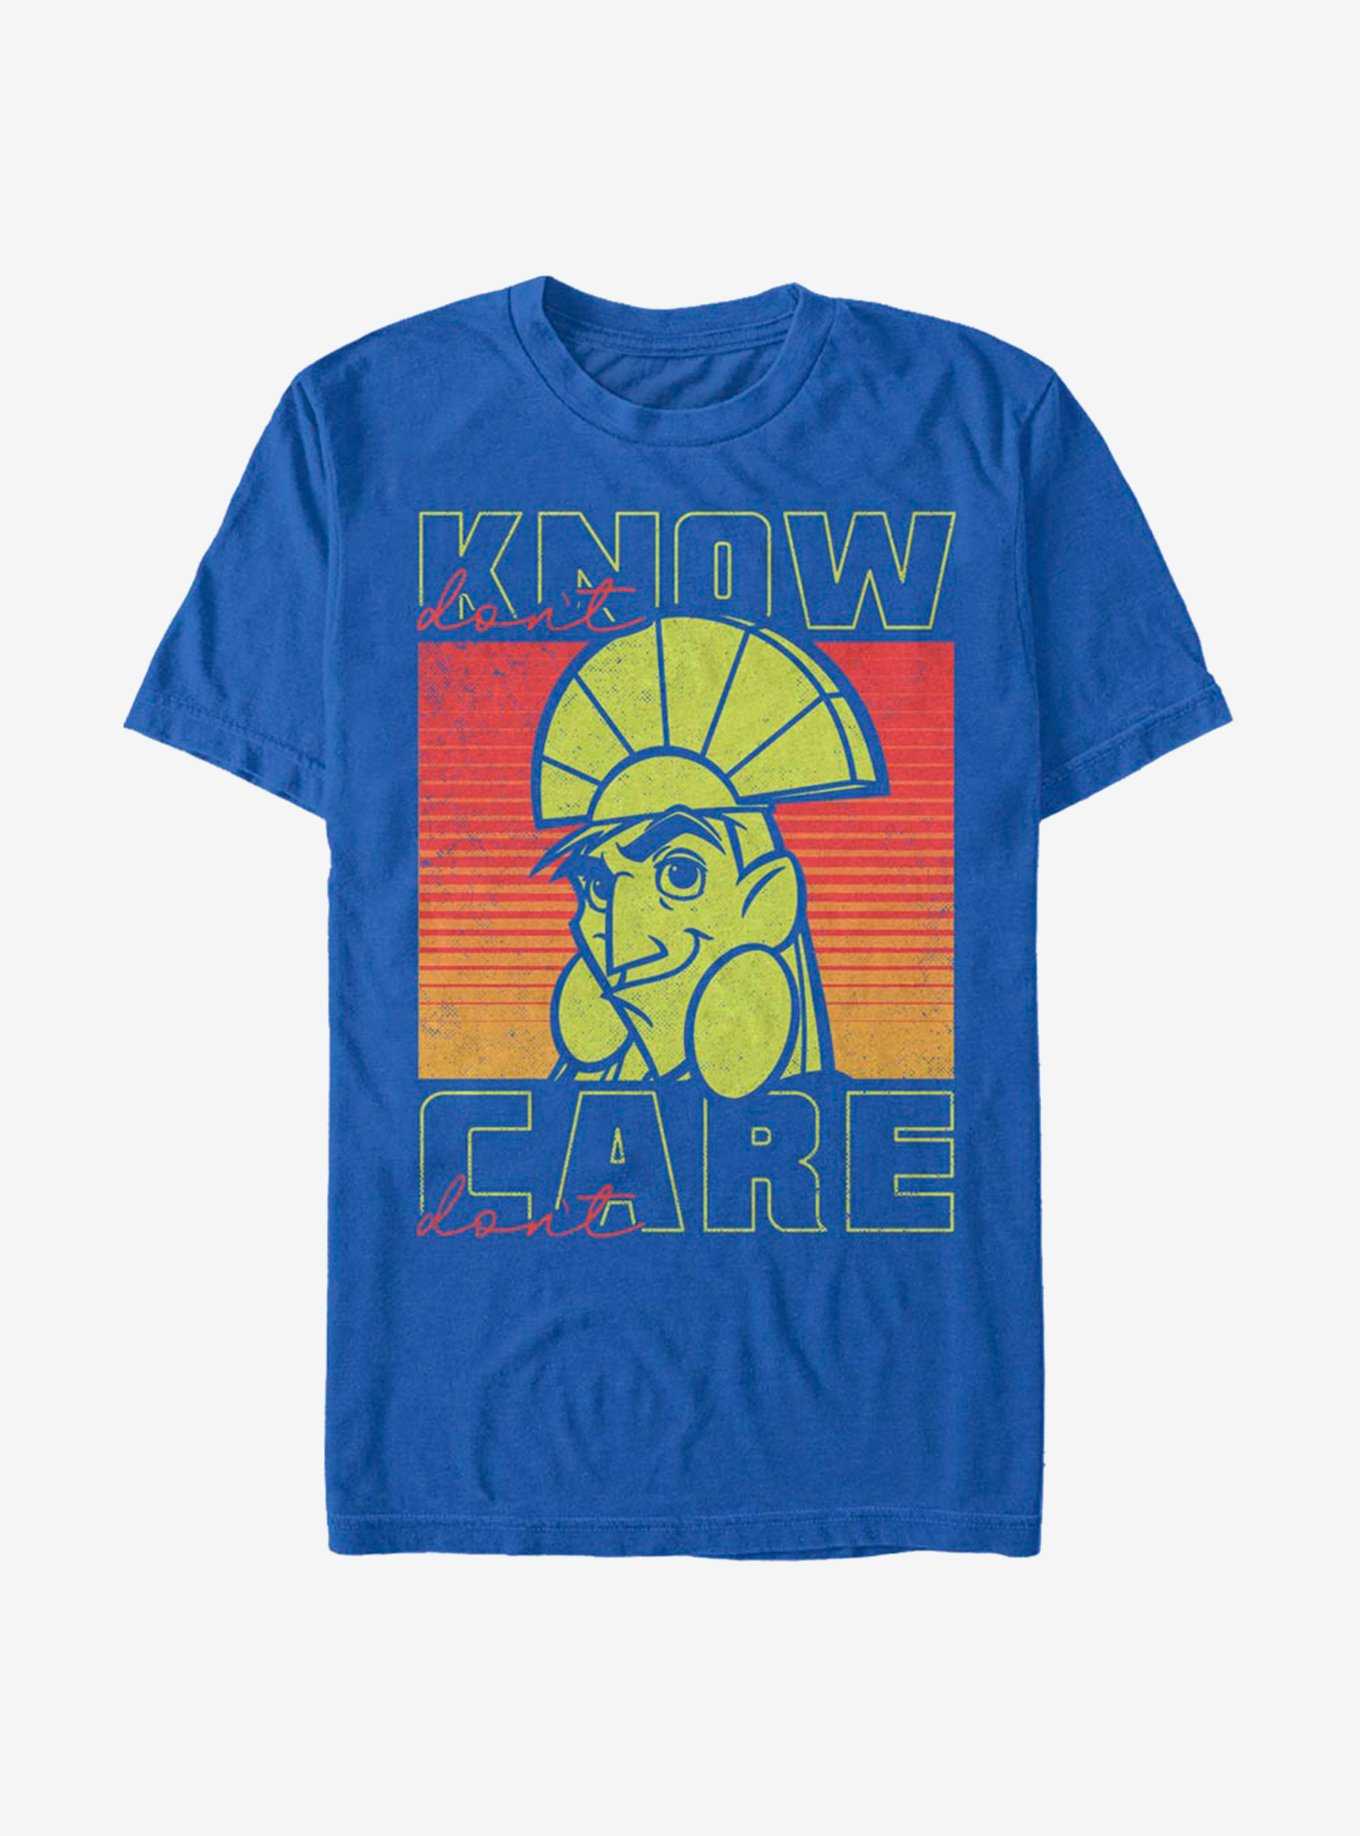 Disney The Emperor's New Groove Don't Know Don't Care Kuzco T-Shirt, , hi-res